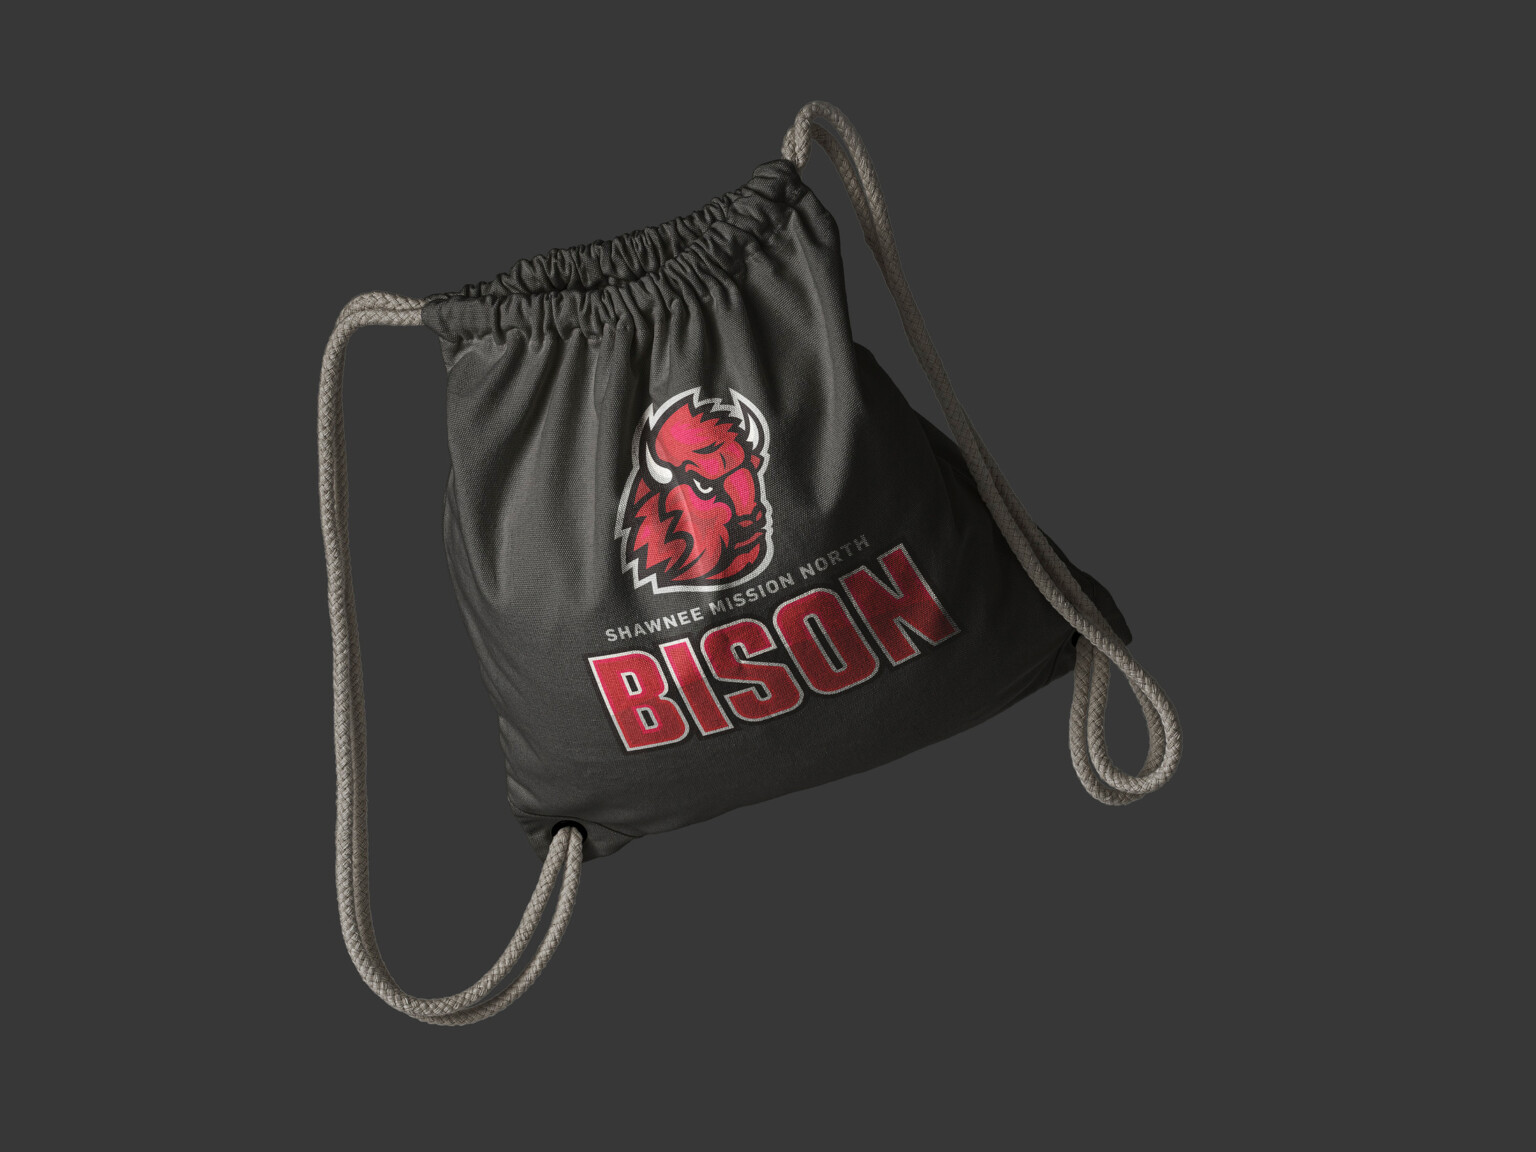 drawstring bag with logo and Bison written across the bottom